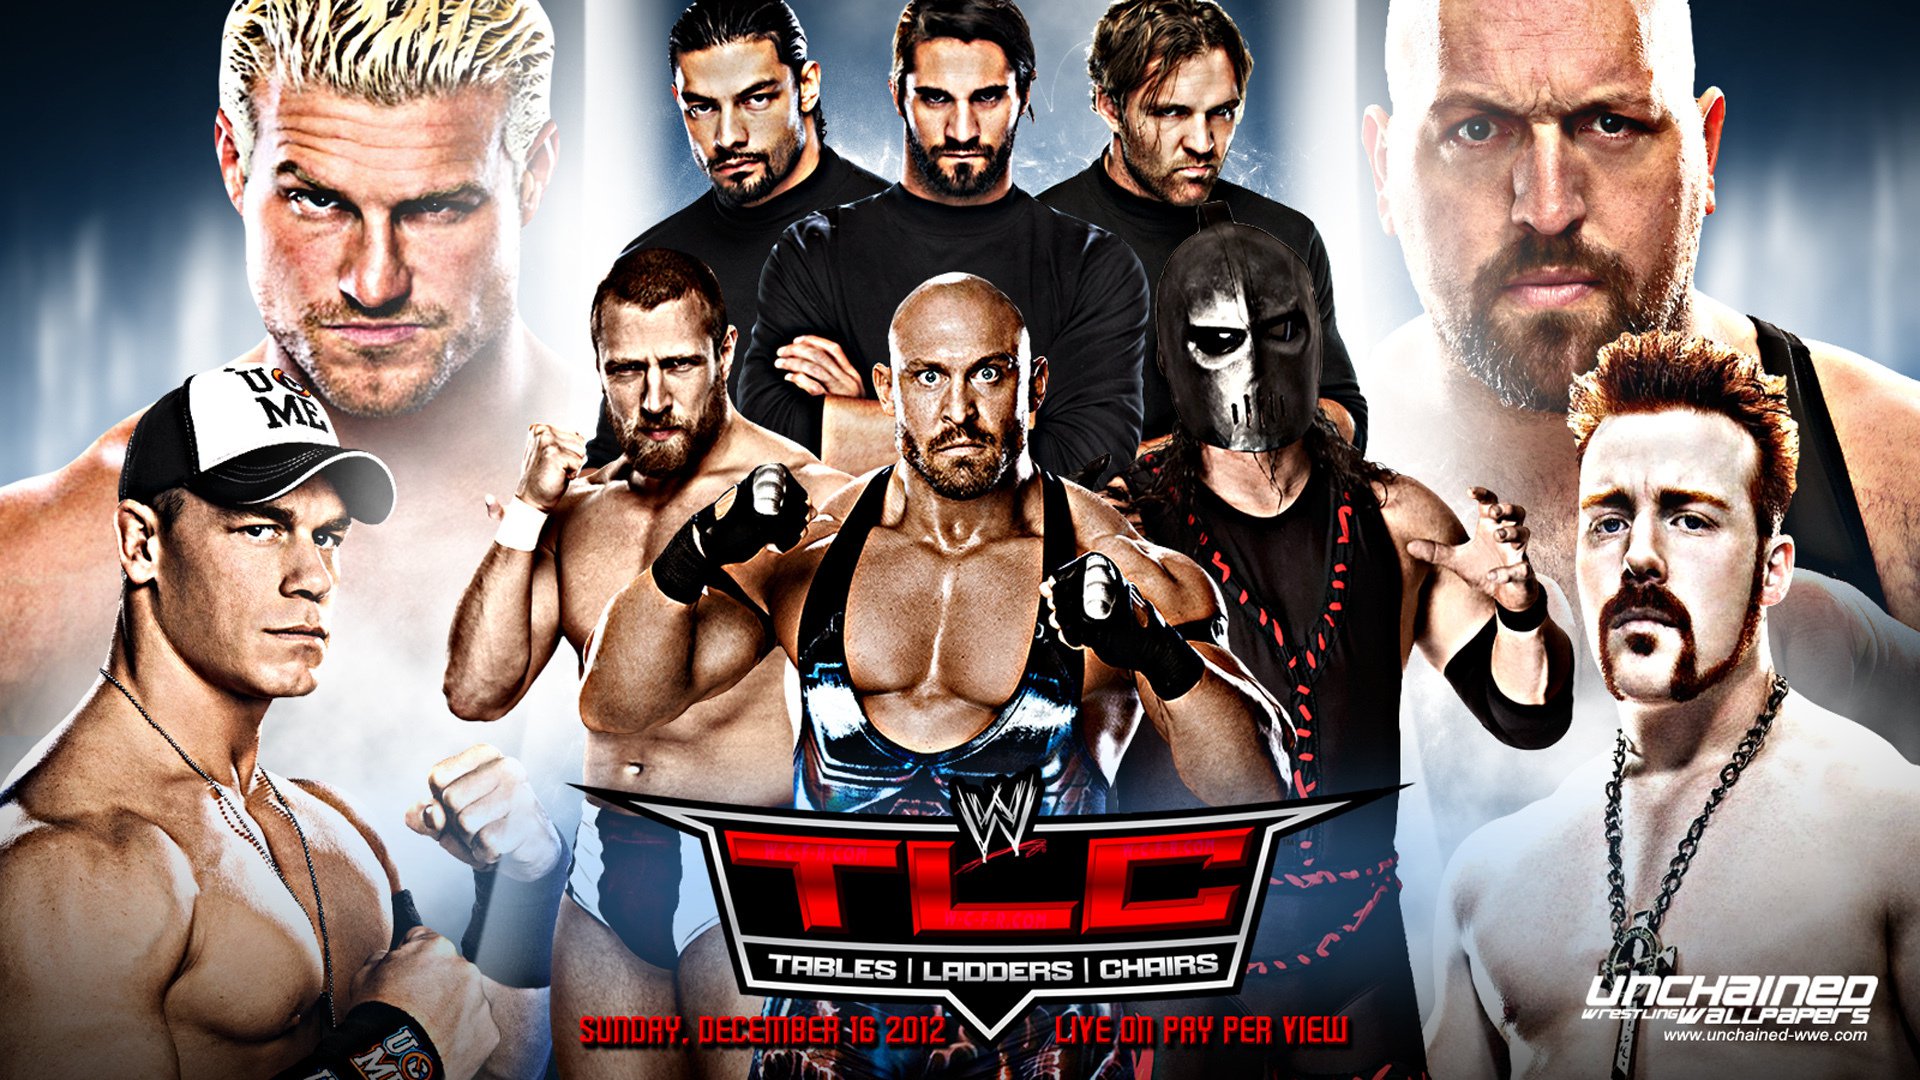 WWE TLC: Tables Ladders & Chairs 2012 #1